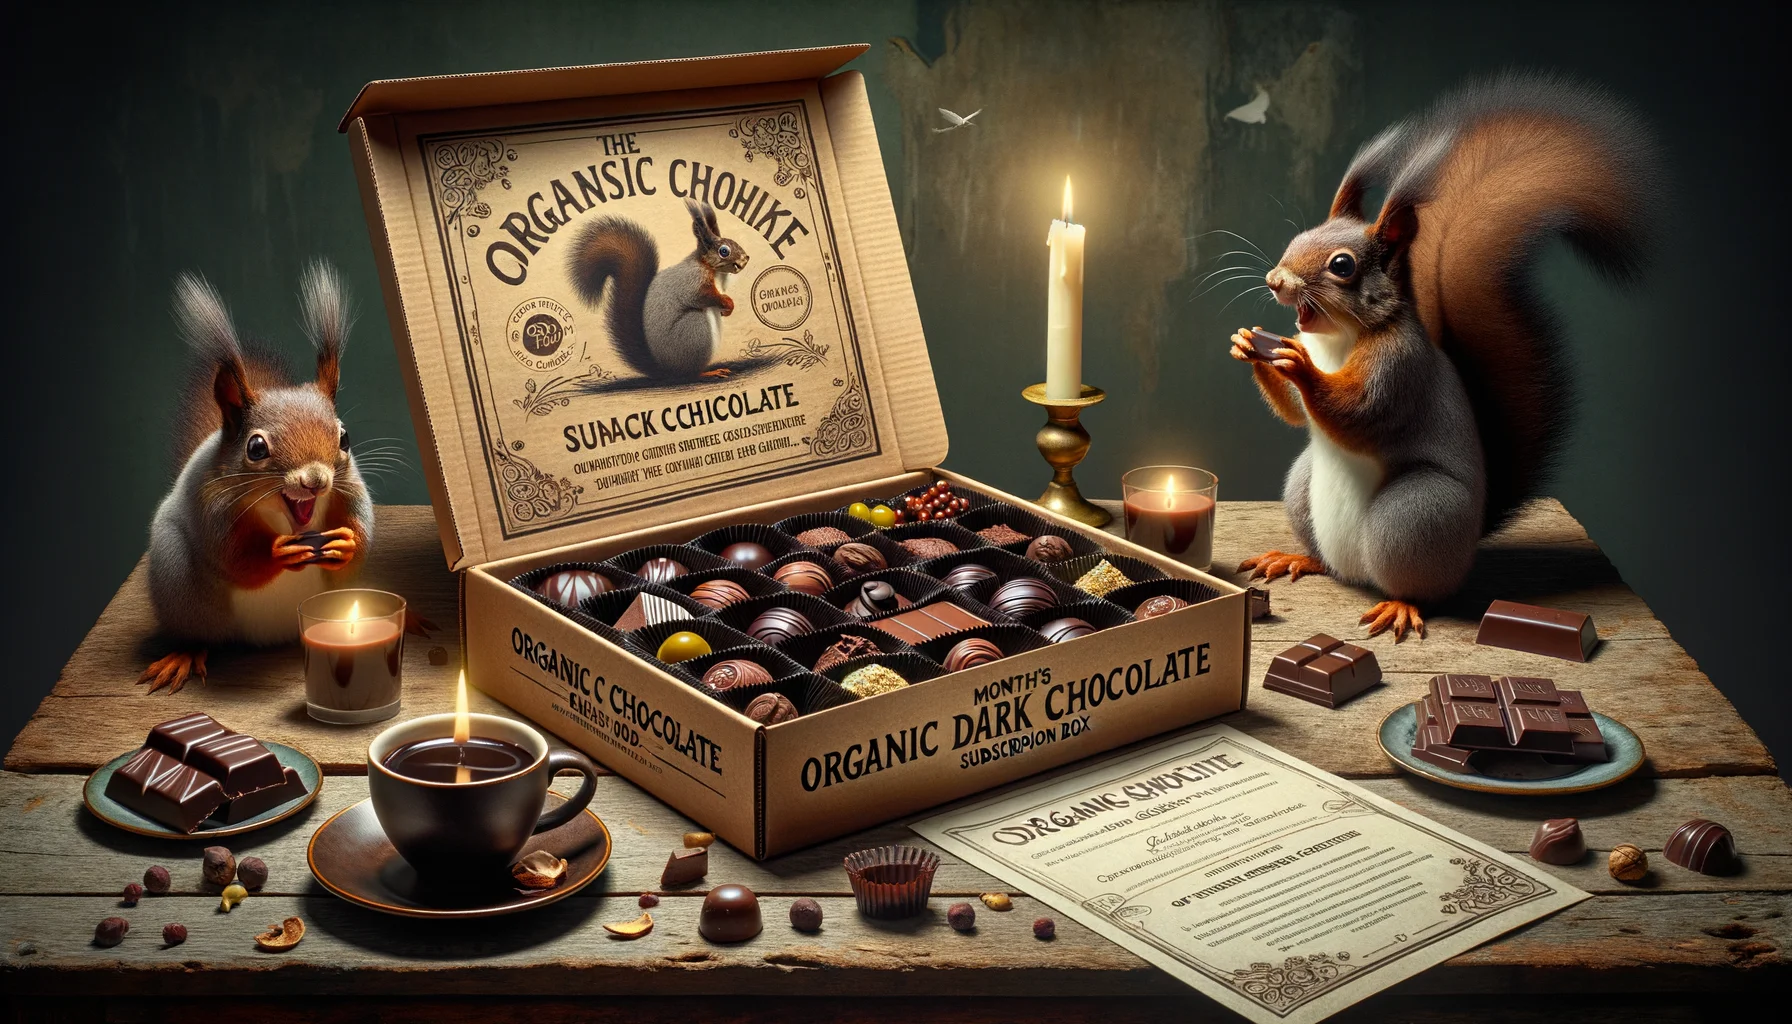 Imagine the perfect scenario for a humourous but realistic portrayal of an Organic Dark Chocolate Subscription Box. The chocolate box sits majestically in the middle of a rustic wooden table. The lid is ajar, revealing an array of delicious dark chocolates, each flavor individually wrapped. Surrounding the box are a number of comically exaggerated signs of eager anticipation: an agitated squirrel eyeing the sweet delights in the box, a lit elegant candle with a discernible chocolate scent, and a descriptive brochure with the month's chocolate selection in whimsically exaggerated fonts. This is the perfect setting dripping with subtle humour and the irresistible allure of organic dark chocolate.